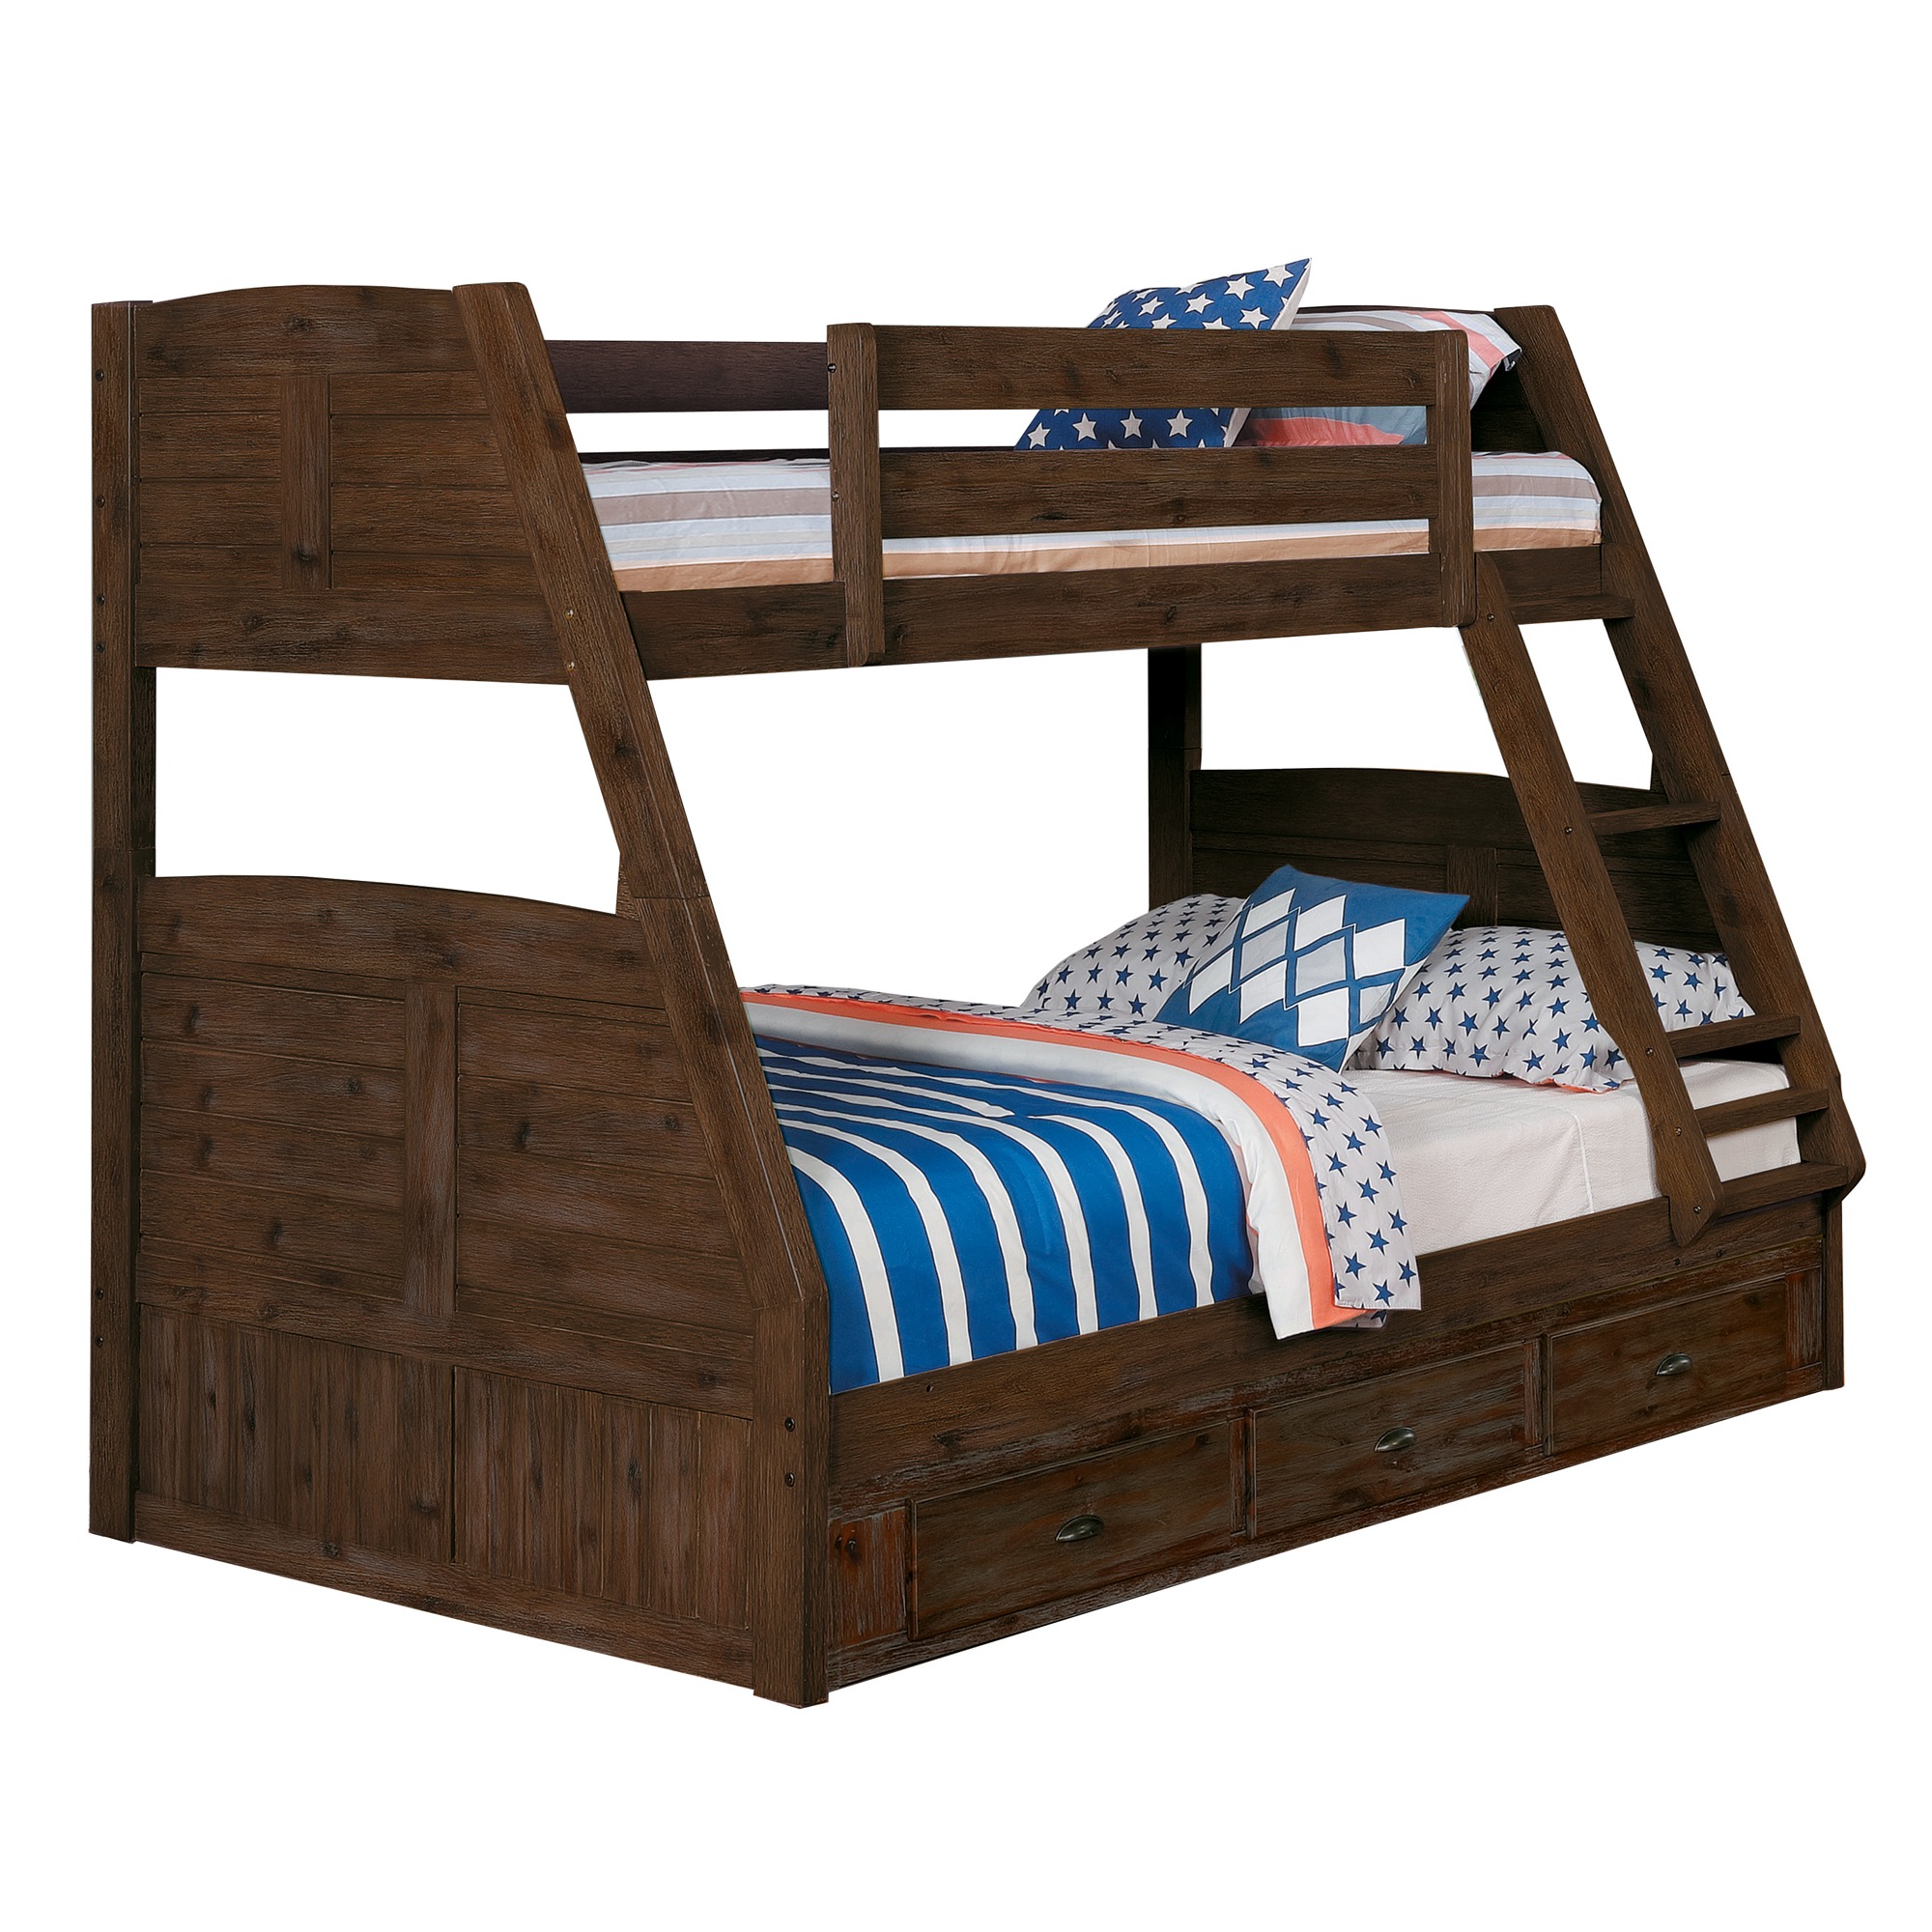 Full Chestnut Hardwood Bunk Bed, Discovery Twin Over Full Bunk Bed